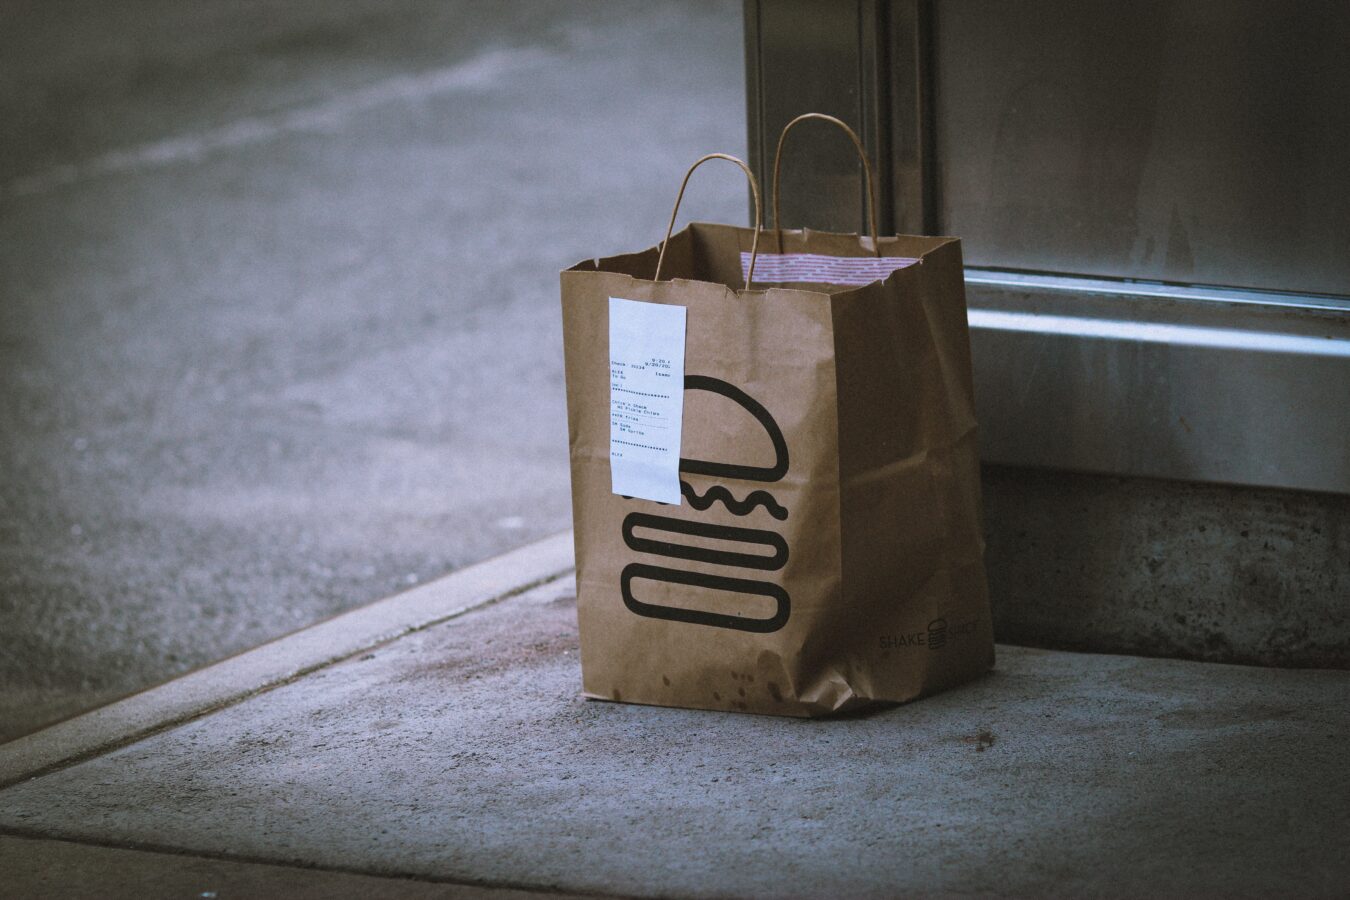 A bag with the hamburger illustration stands alone on the sidewalk and shows customer engagement is key to success because disengaged people are not inclined to buy stuff.